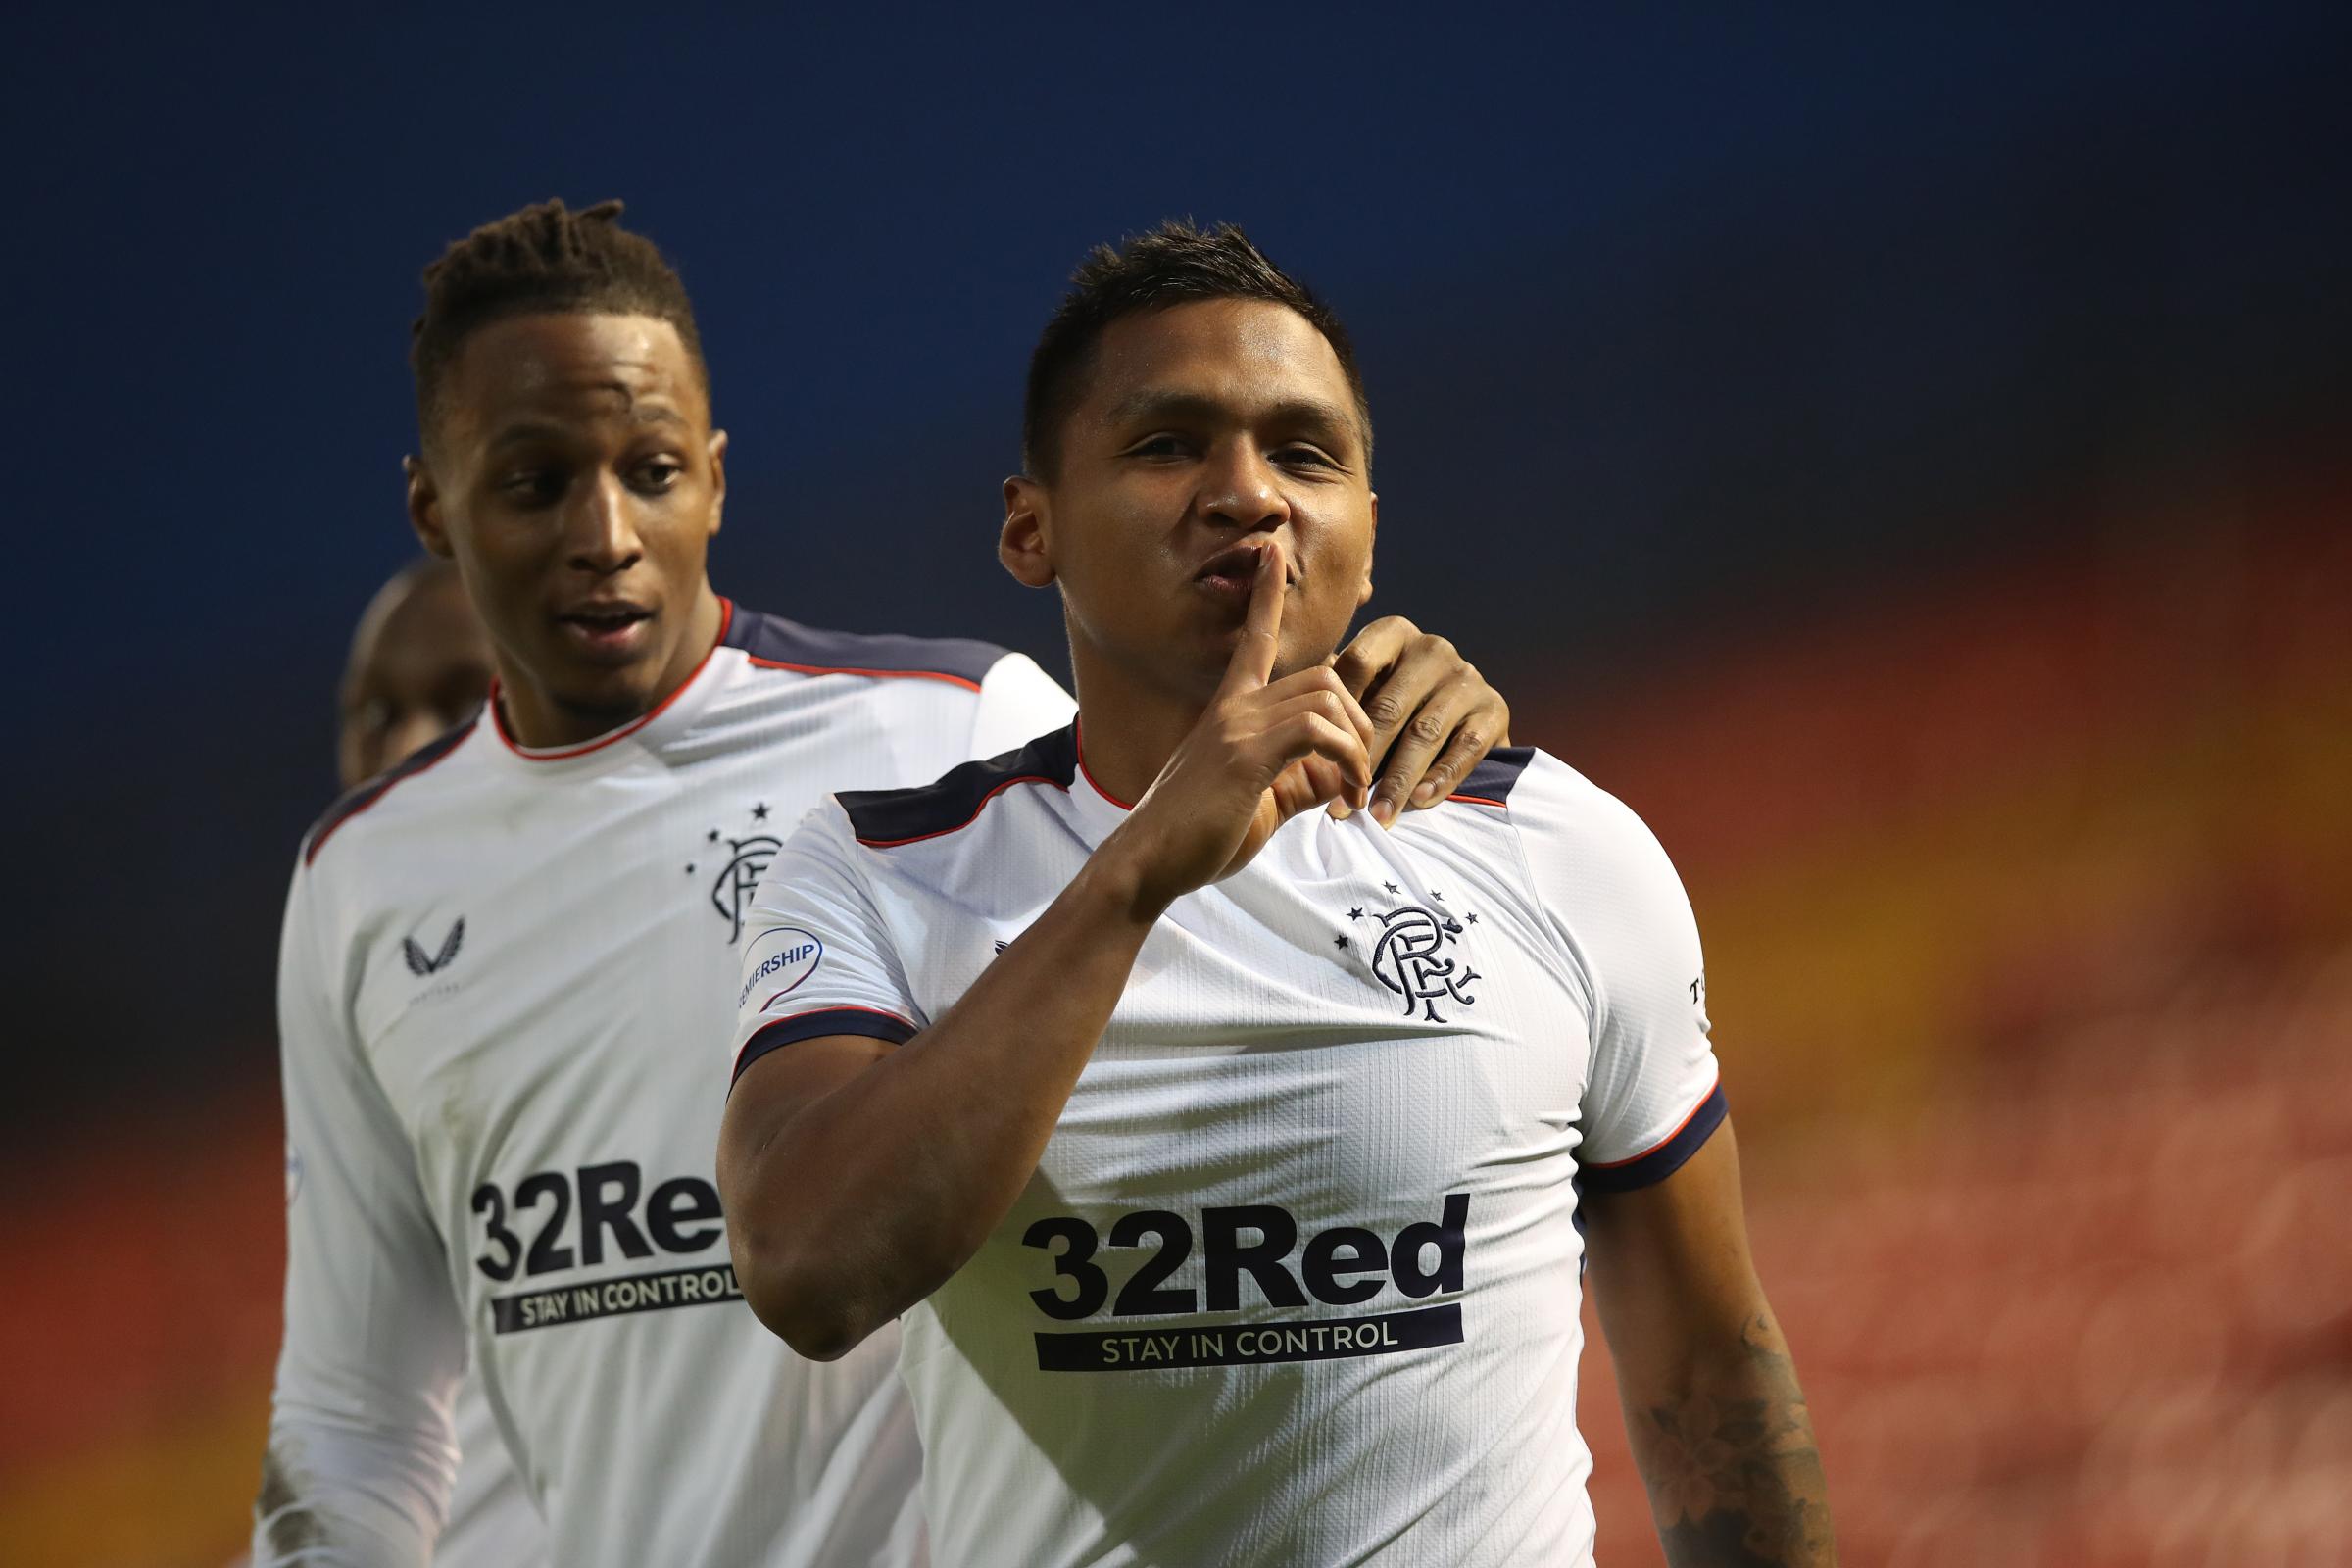 Jon Daly on why Alfredo Morelos is back - and can help Rangers emulate the Class of 2013/14's unbeaten league run